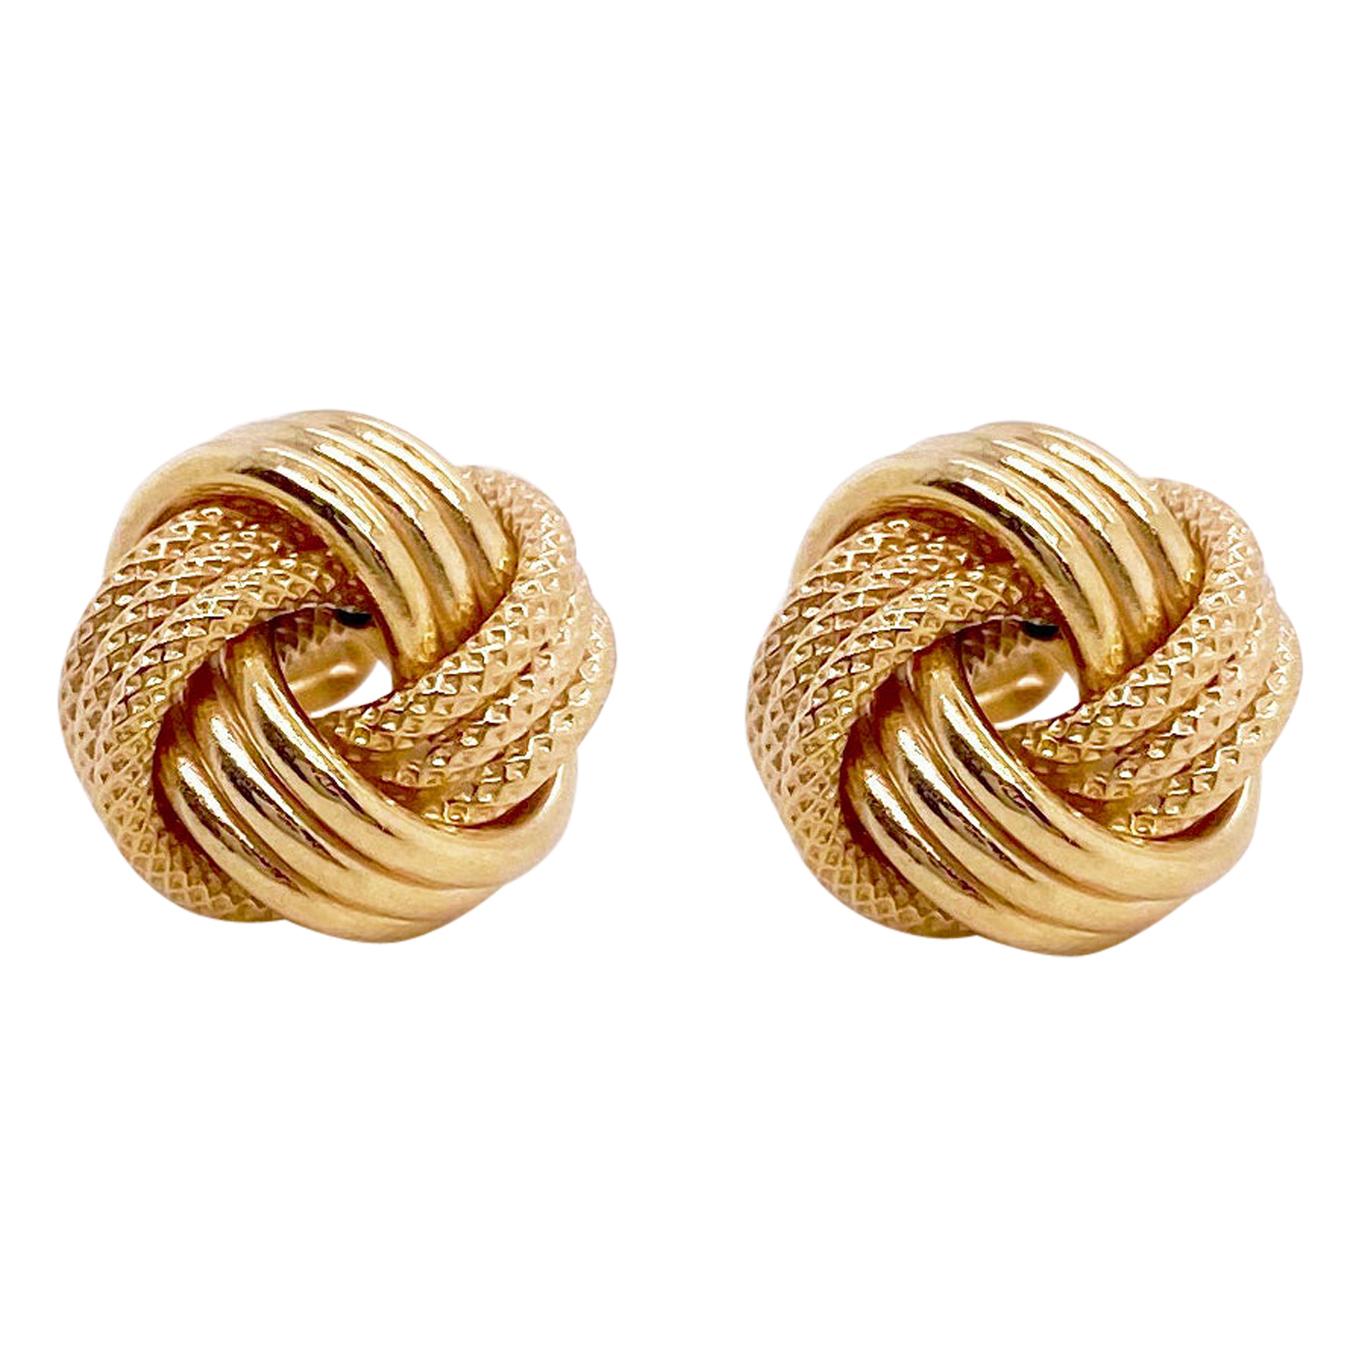 14K Yellow Gold Shiny One Row Love Knot Post Earrings by IcedTime 